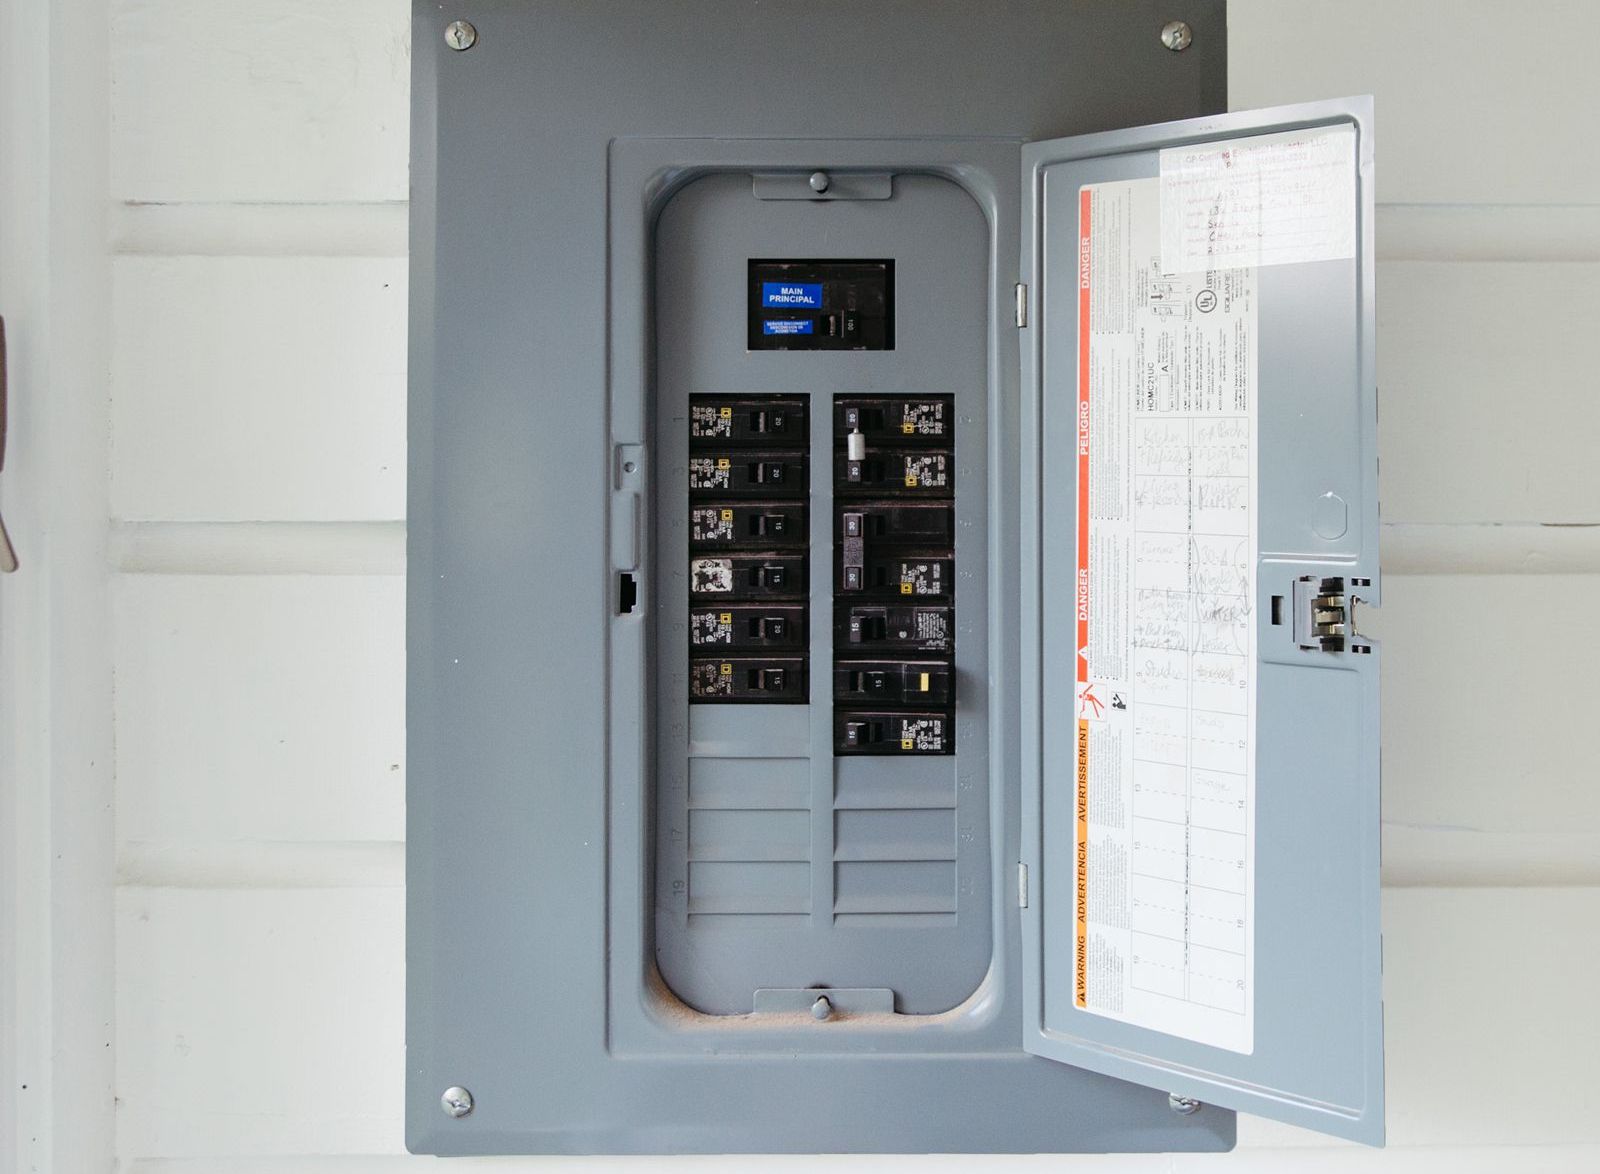 Electrical panel with circuit breakers and wires neatly organized.